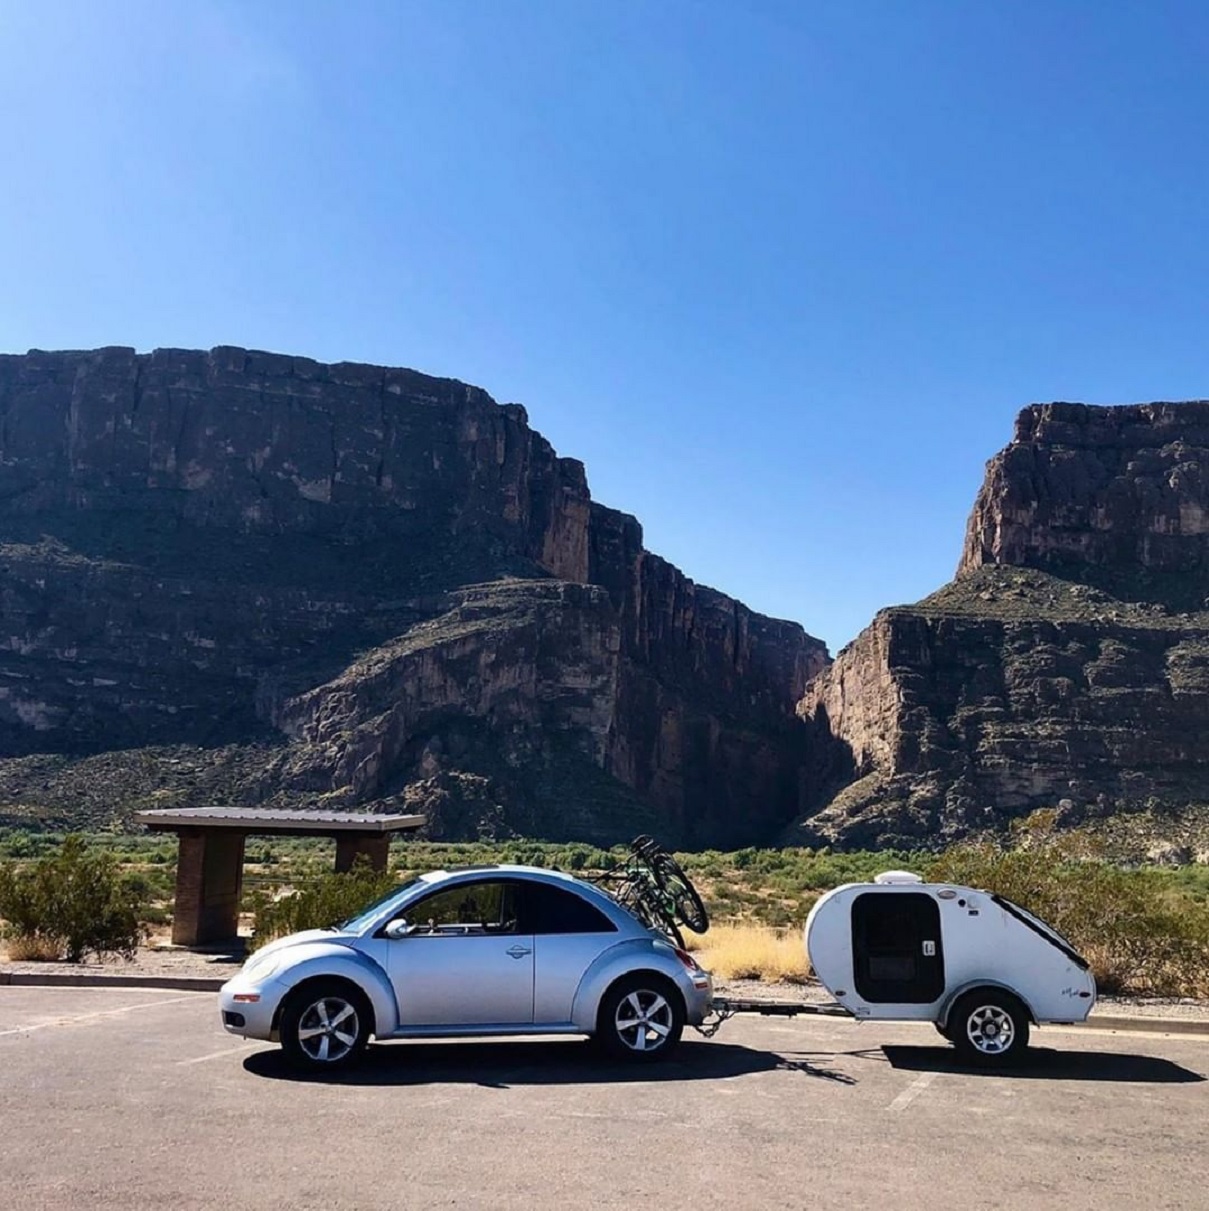 A silver Volkswagen New Beetle towing a trailer, parked in front of a mountain range